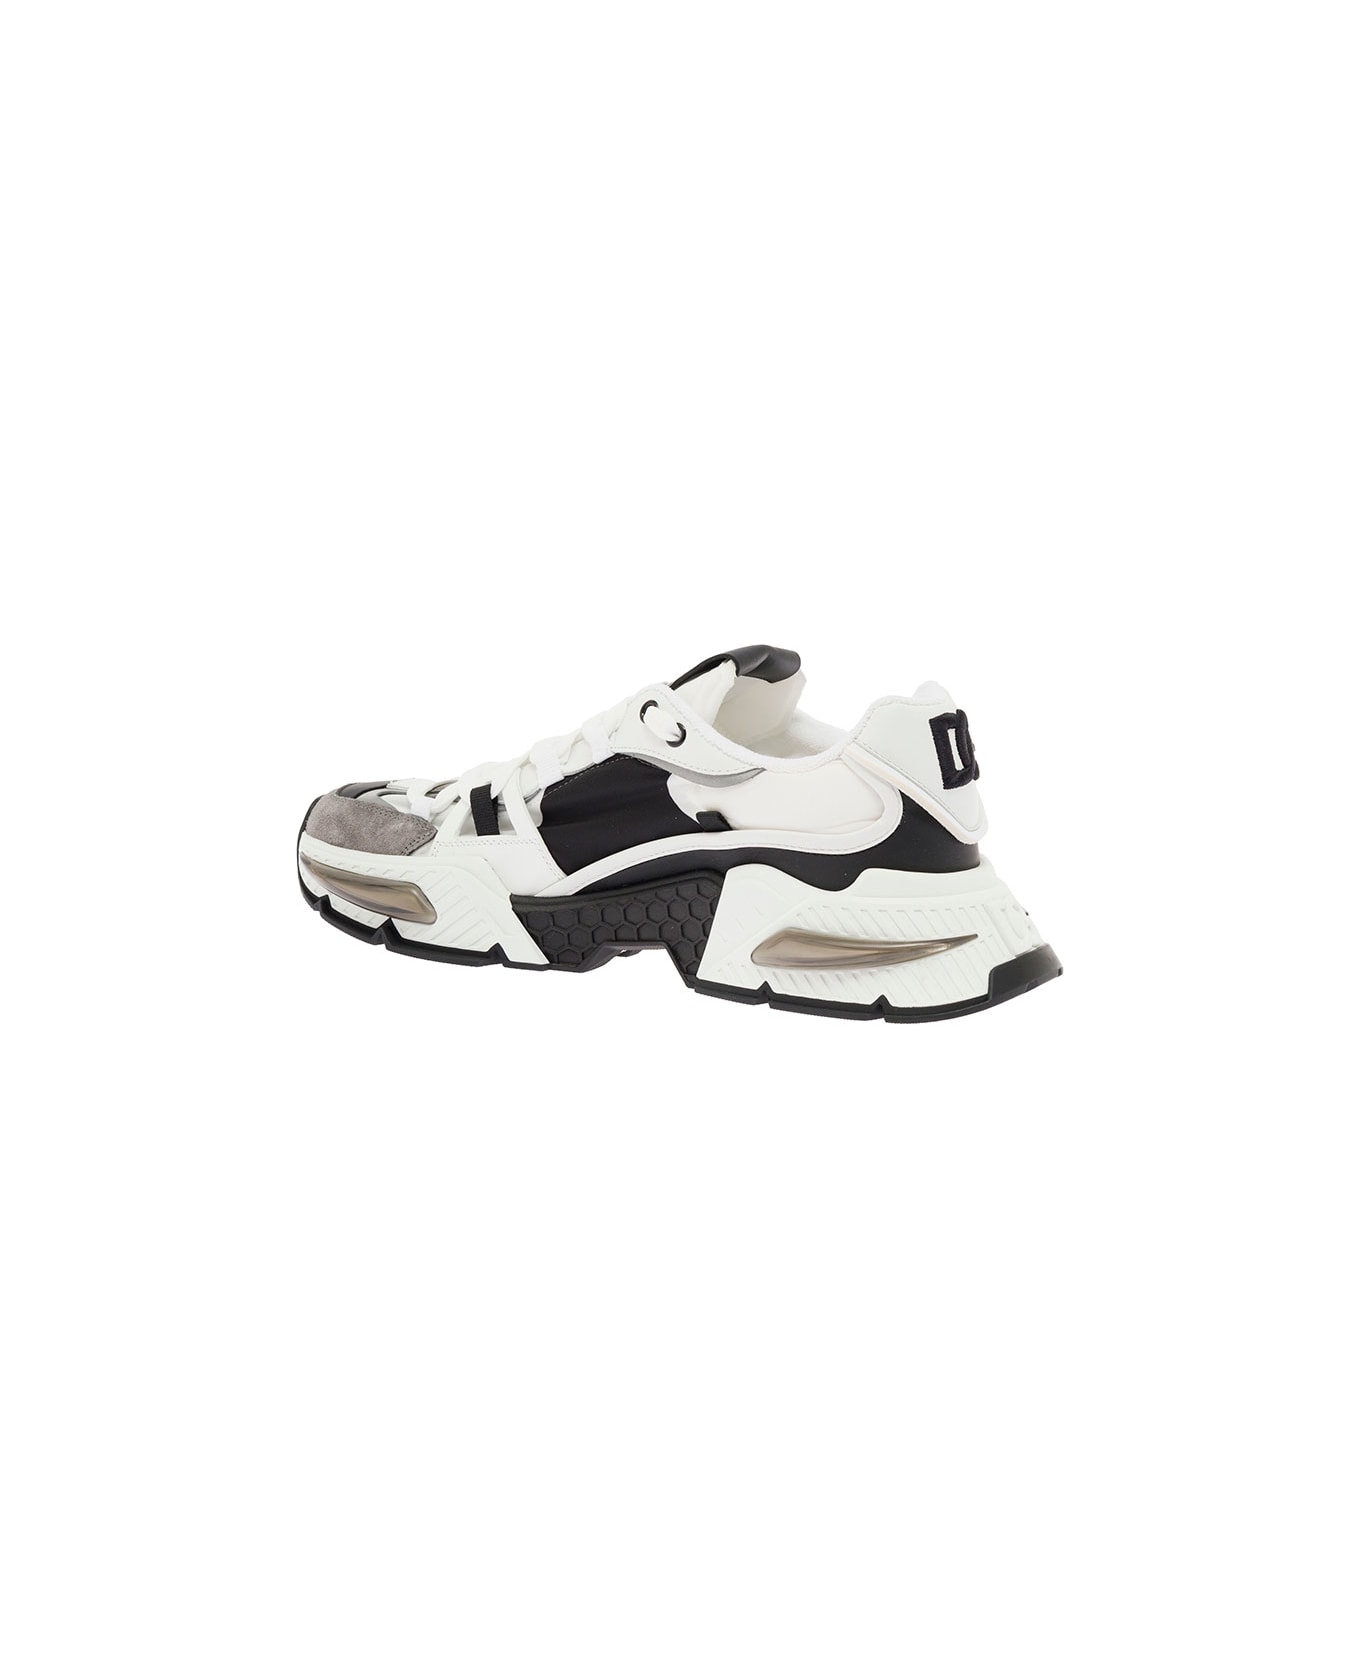 Dolce & Gabbana Women's Airmaster Mix Of Materials Sneakers - White